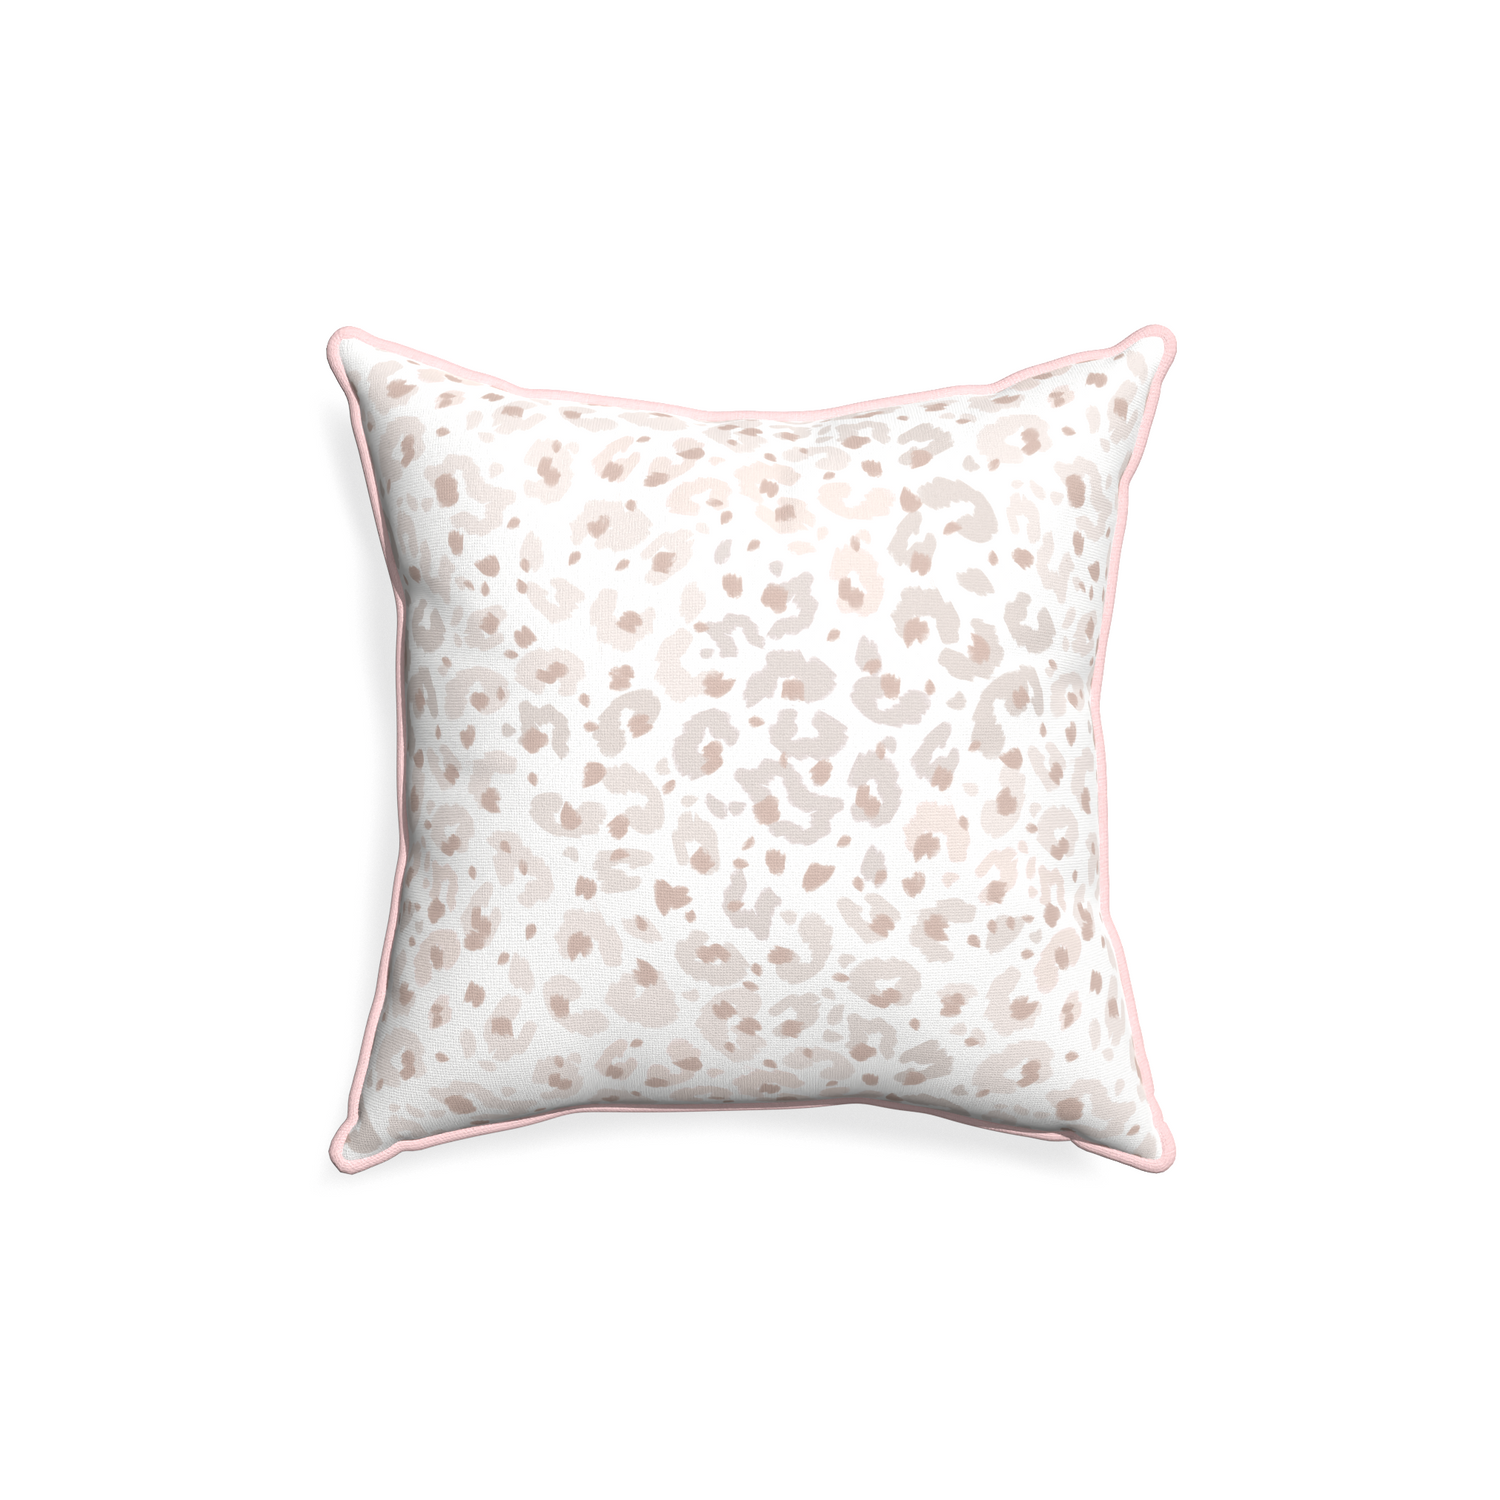 18-square rosie custom pillow with petal piping on white background